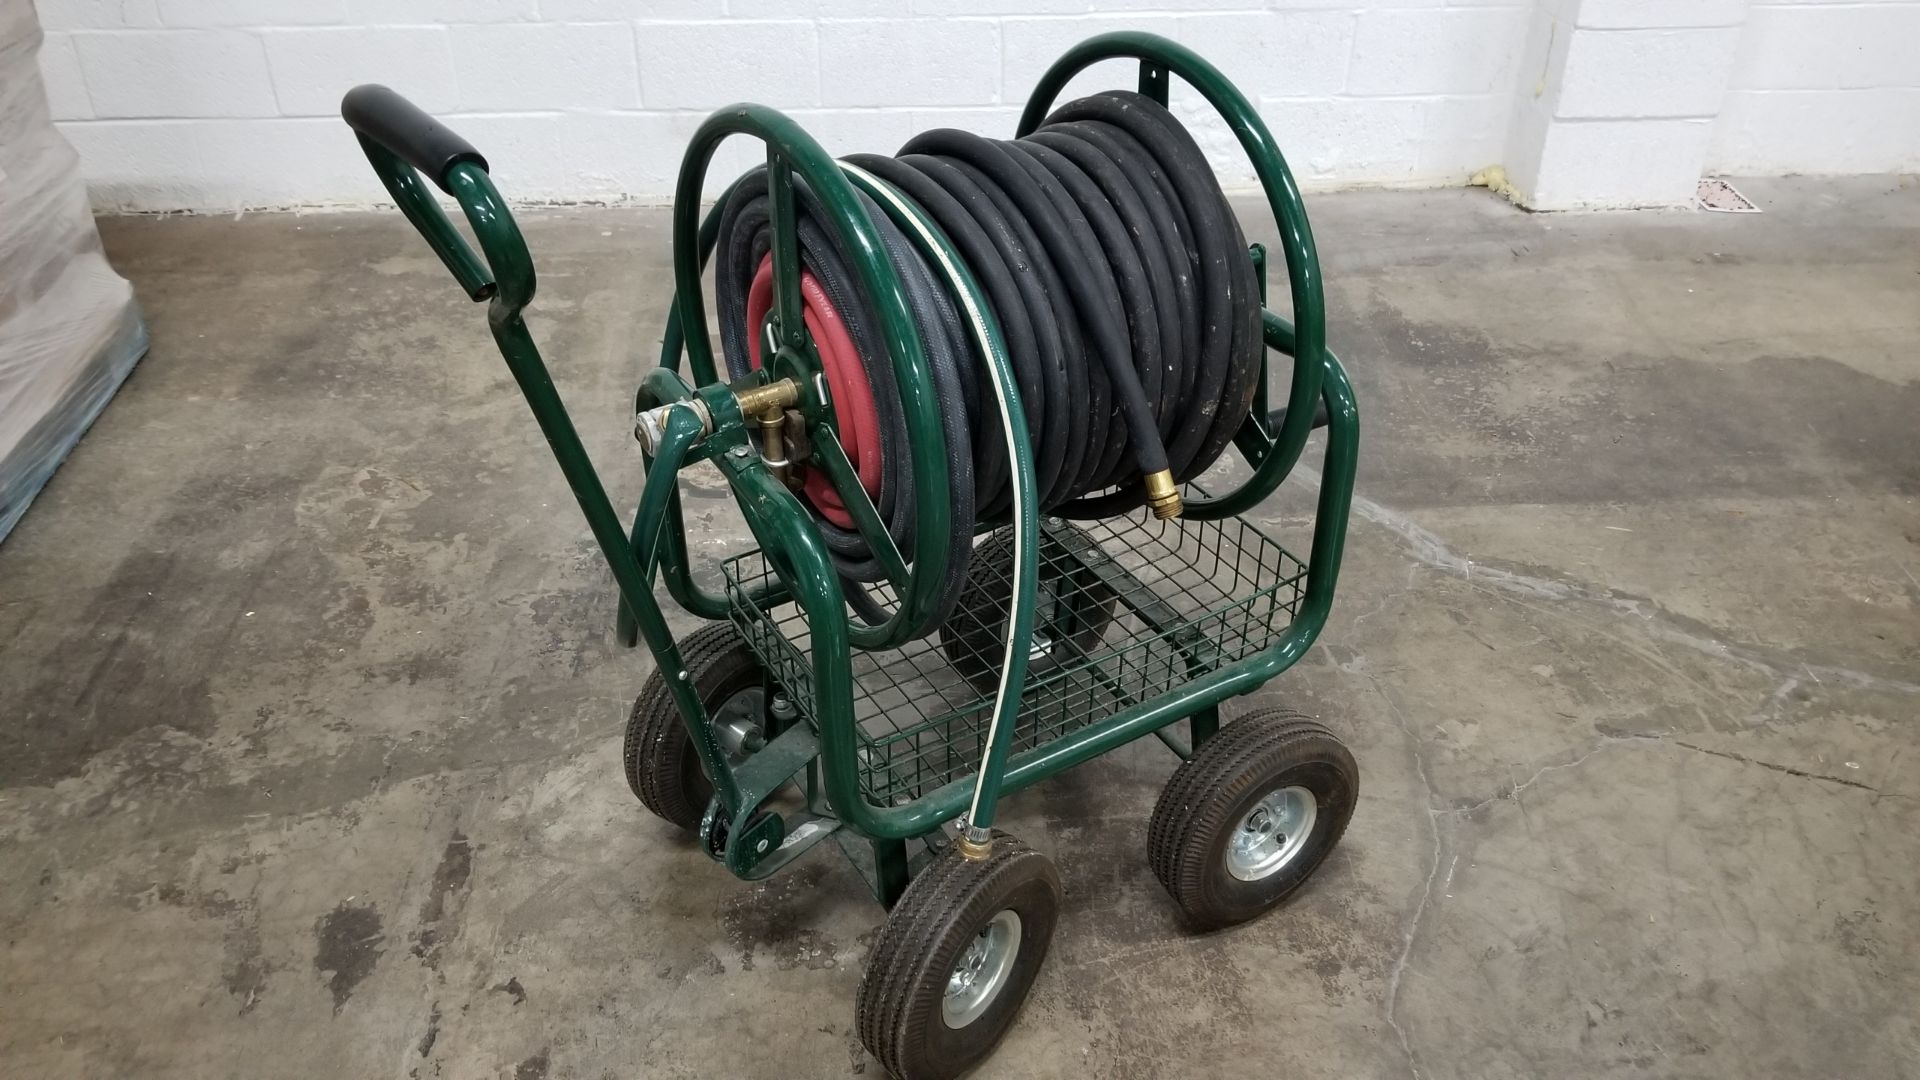 Hose Cart with approximately 200ft of hose